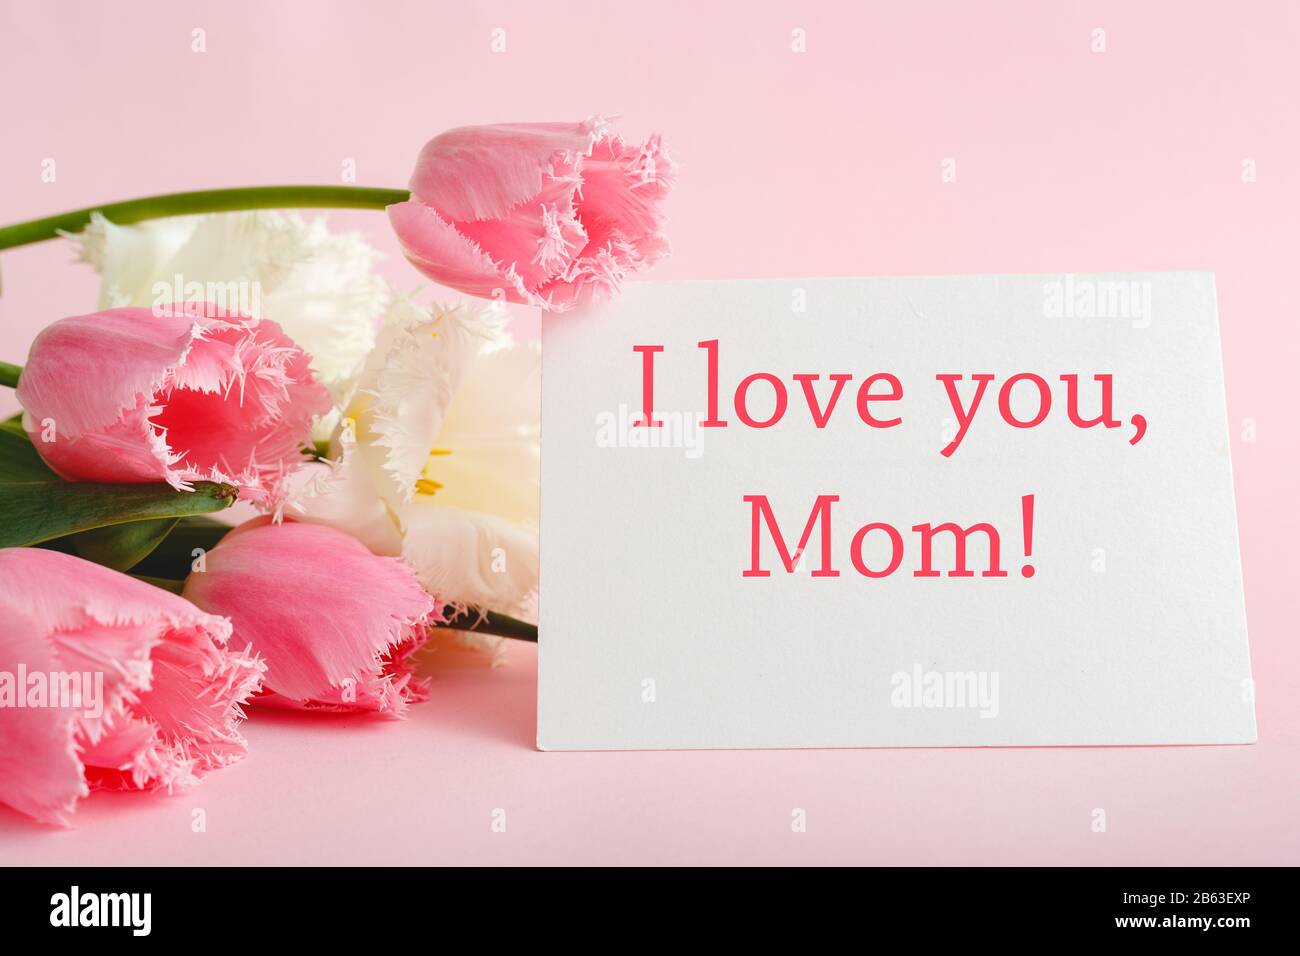 I love you Mom text on gift card in flower bouquet on pink ...